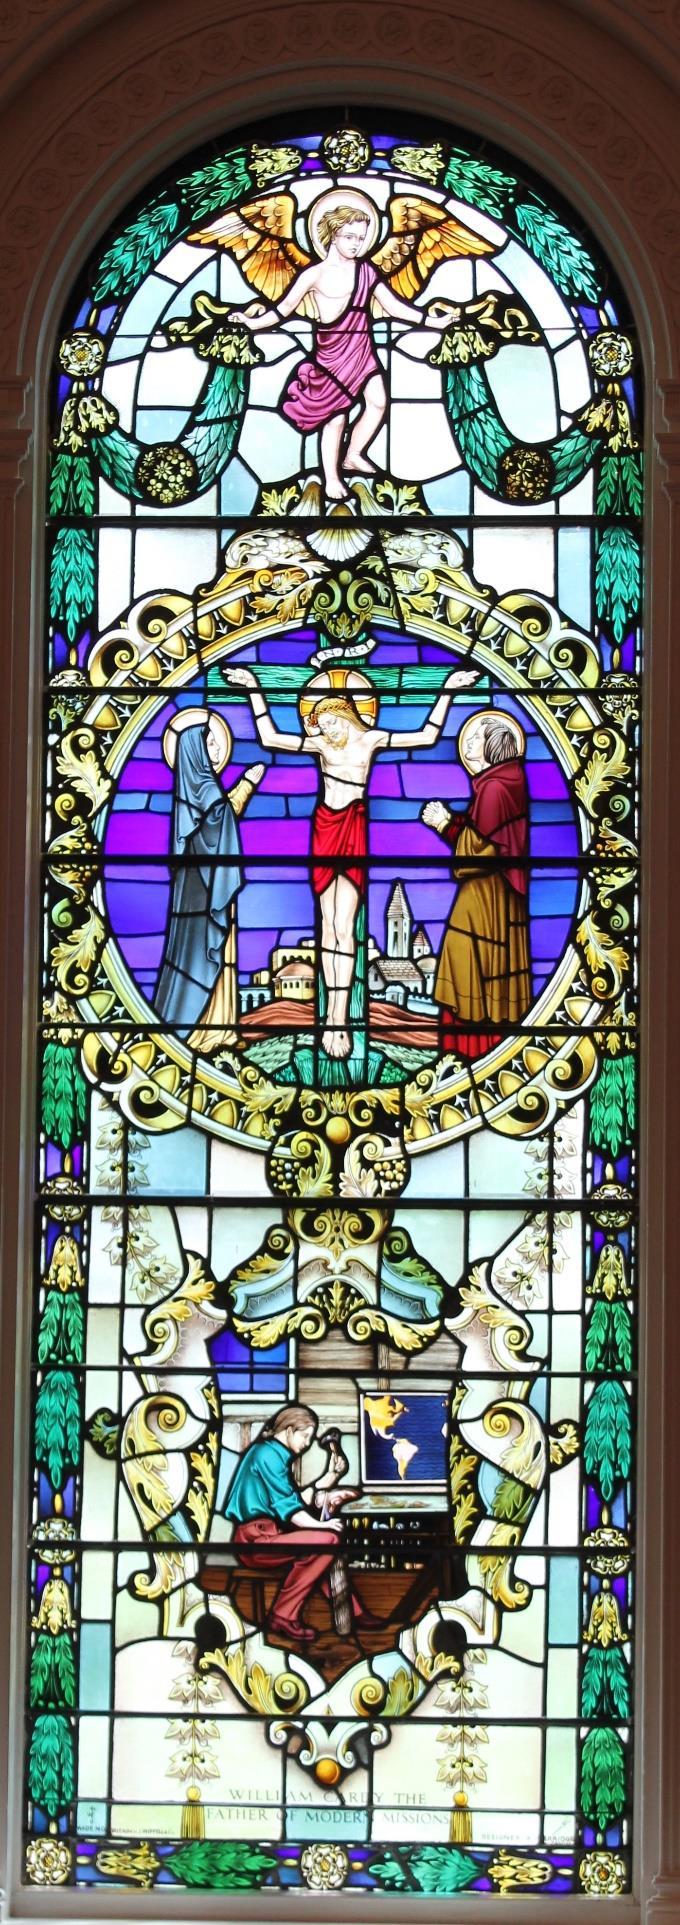 (Third Window on right side facing Chancel) Upper Medallion: Christ on the Cross Luke 23:33 Lower Medallion: William Carey A shoemaker by